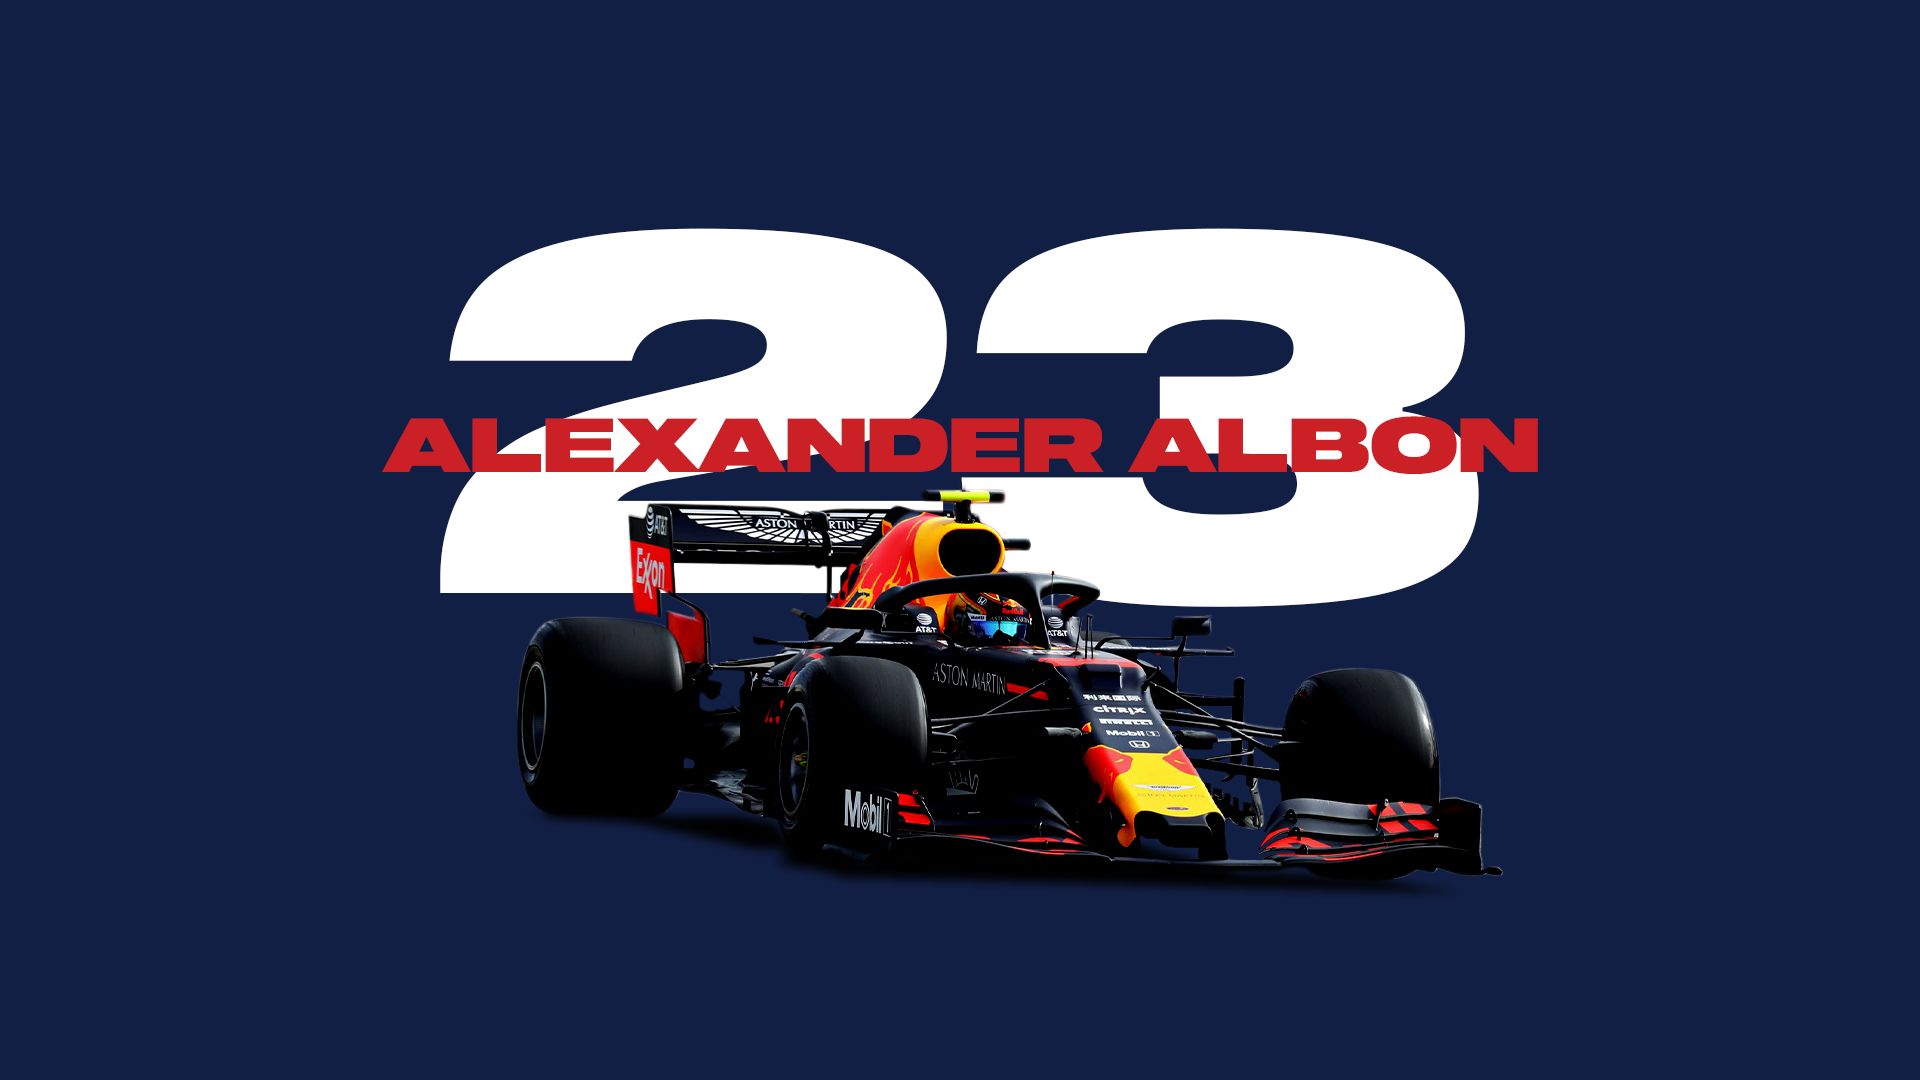 RedBull F1 wallpaper by ElBis42  Download on ZEDGE  fbc0